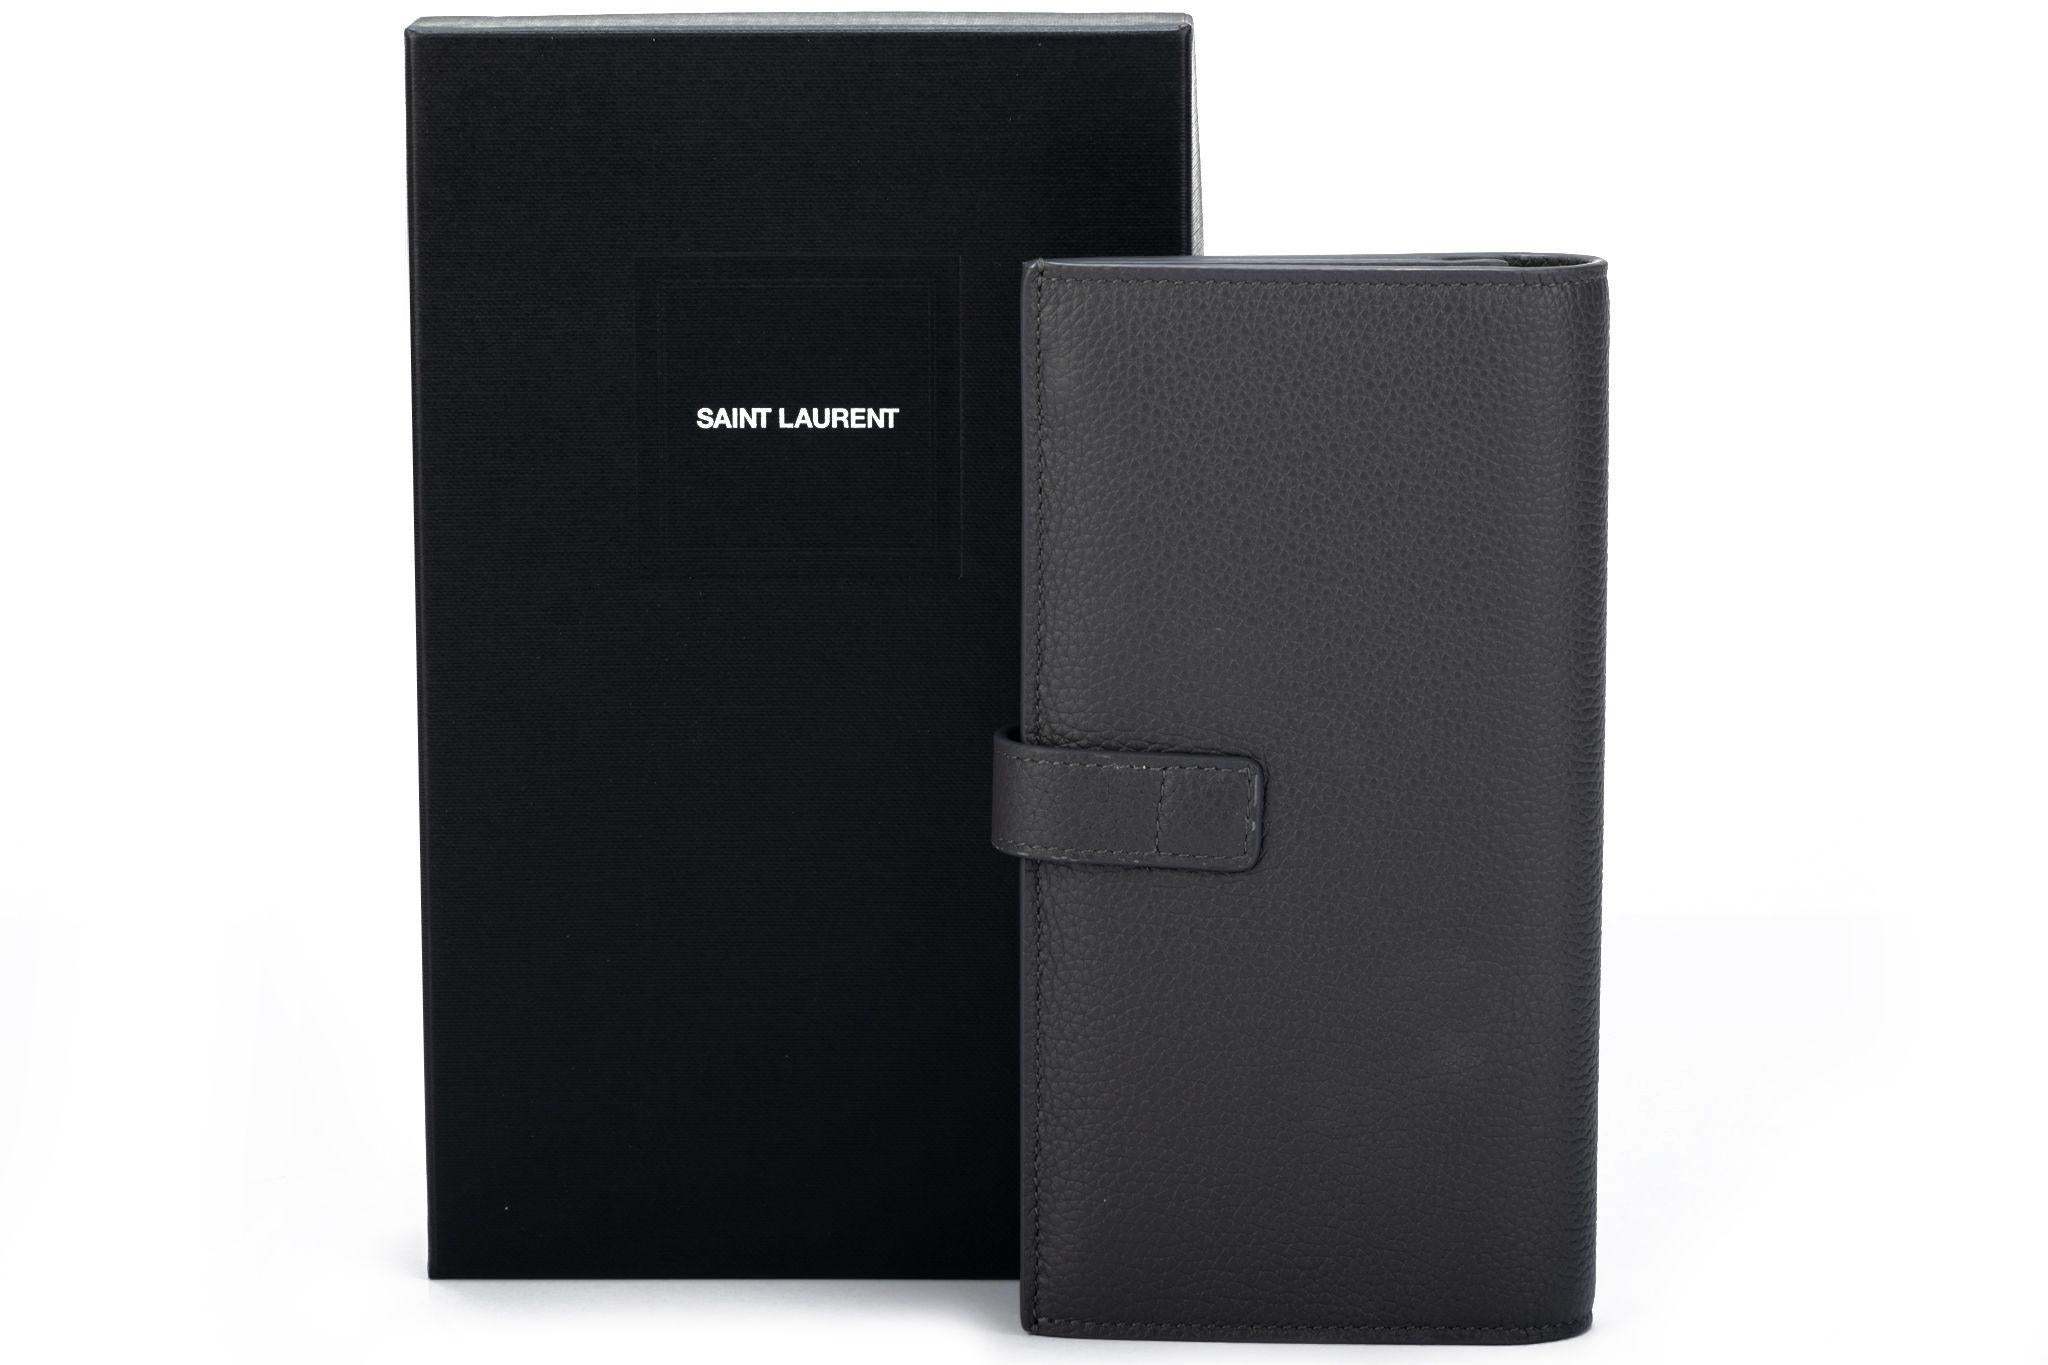 Yves Saint Laurent new asphalt grey pebbled leather wallet with brushed silver tone hardware. Detachable center credit card compartment. Comes with original box.